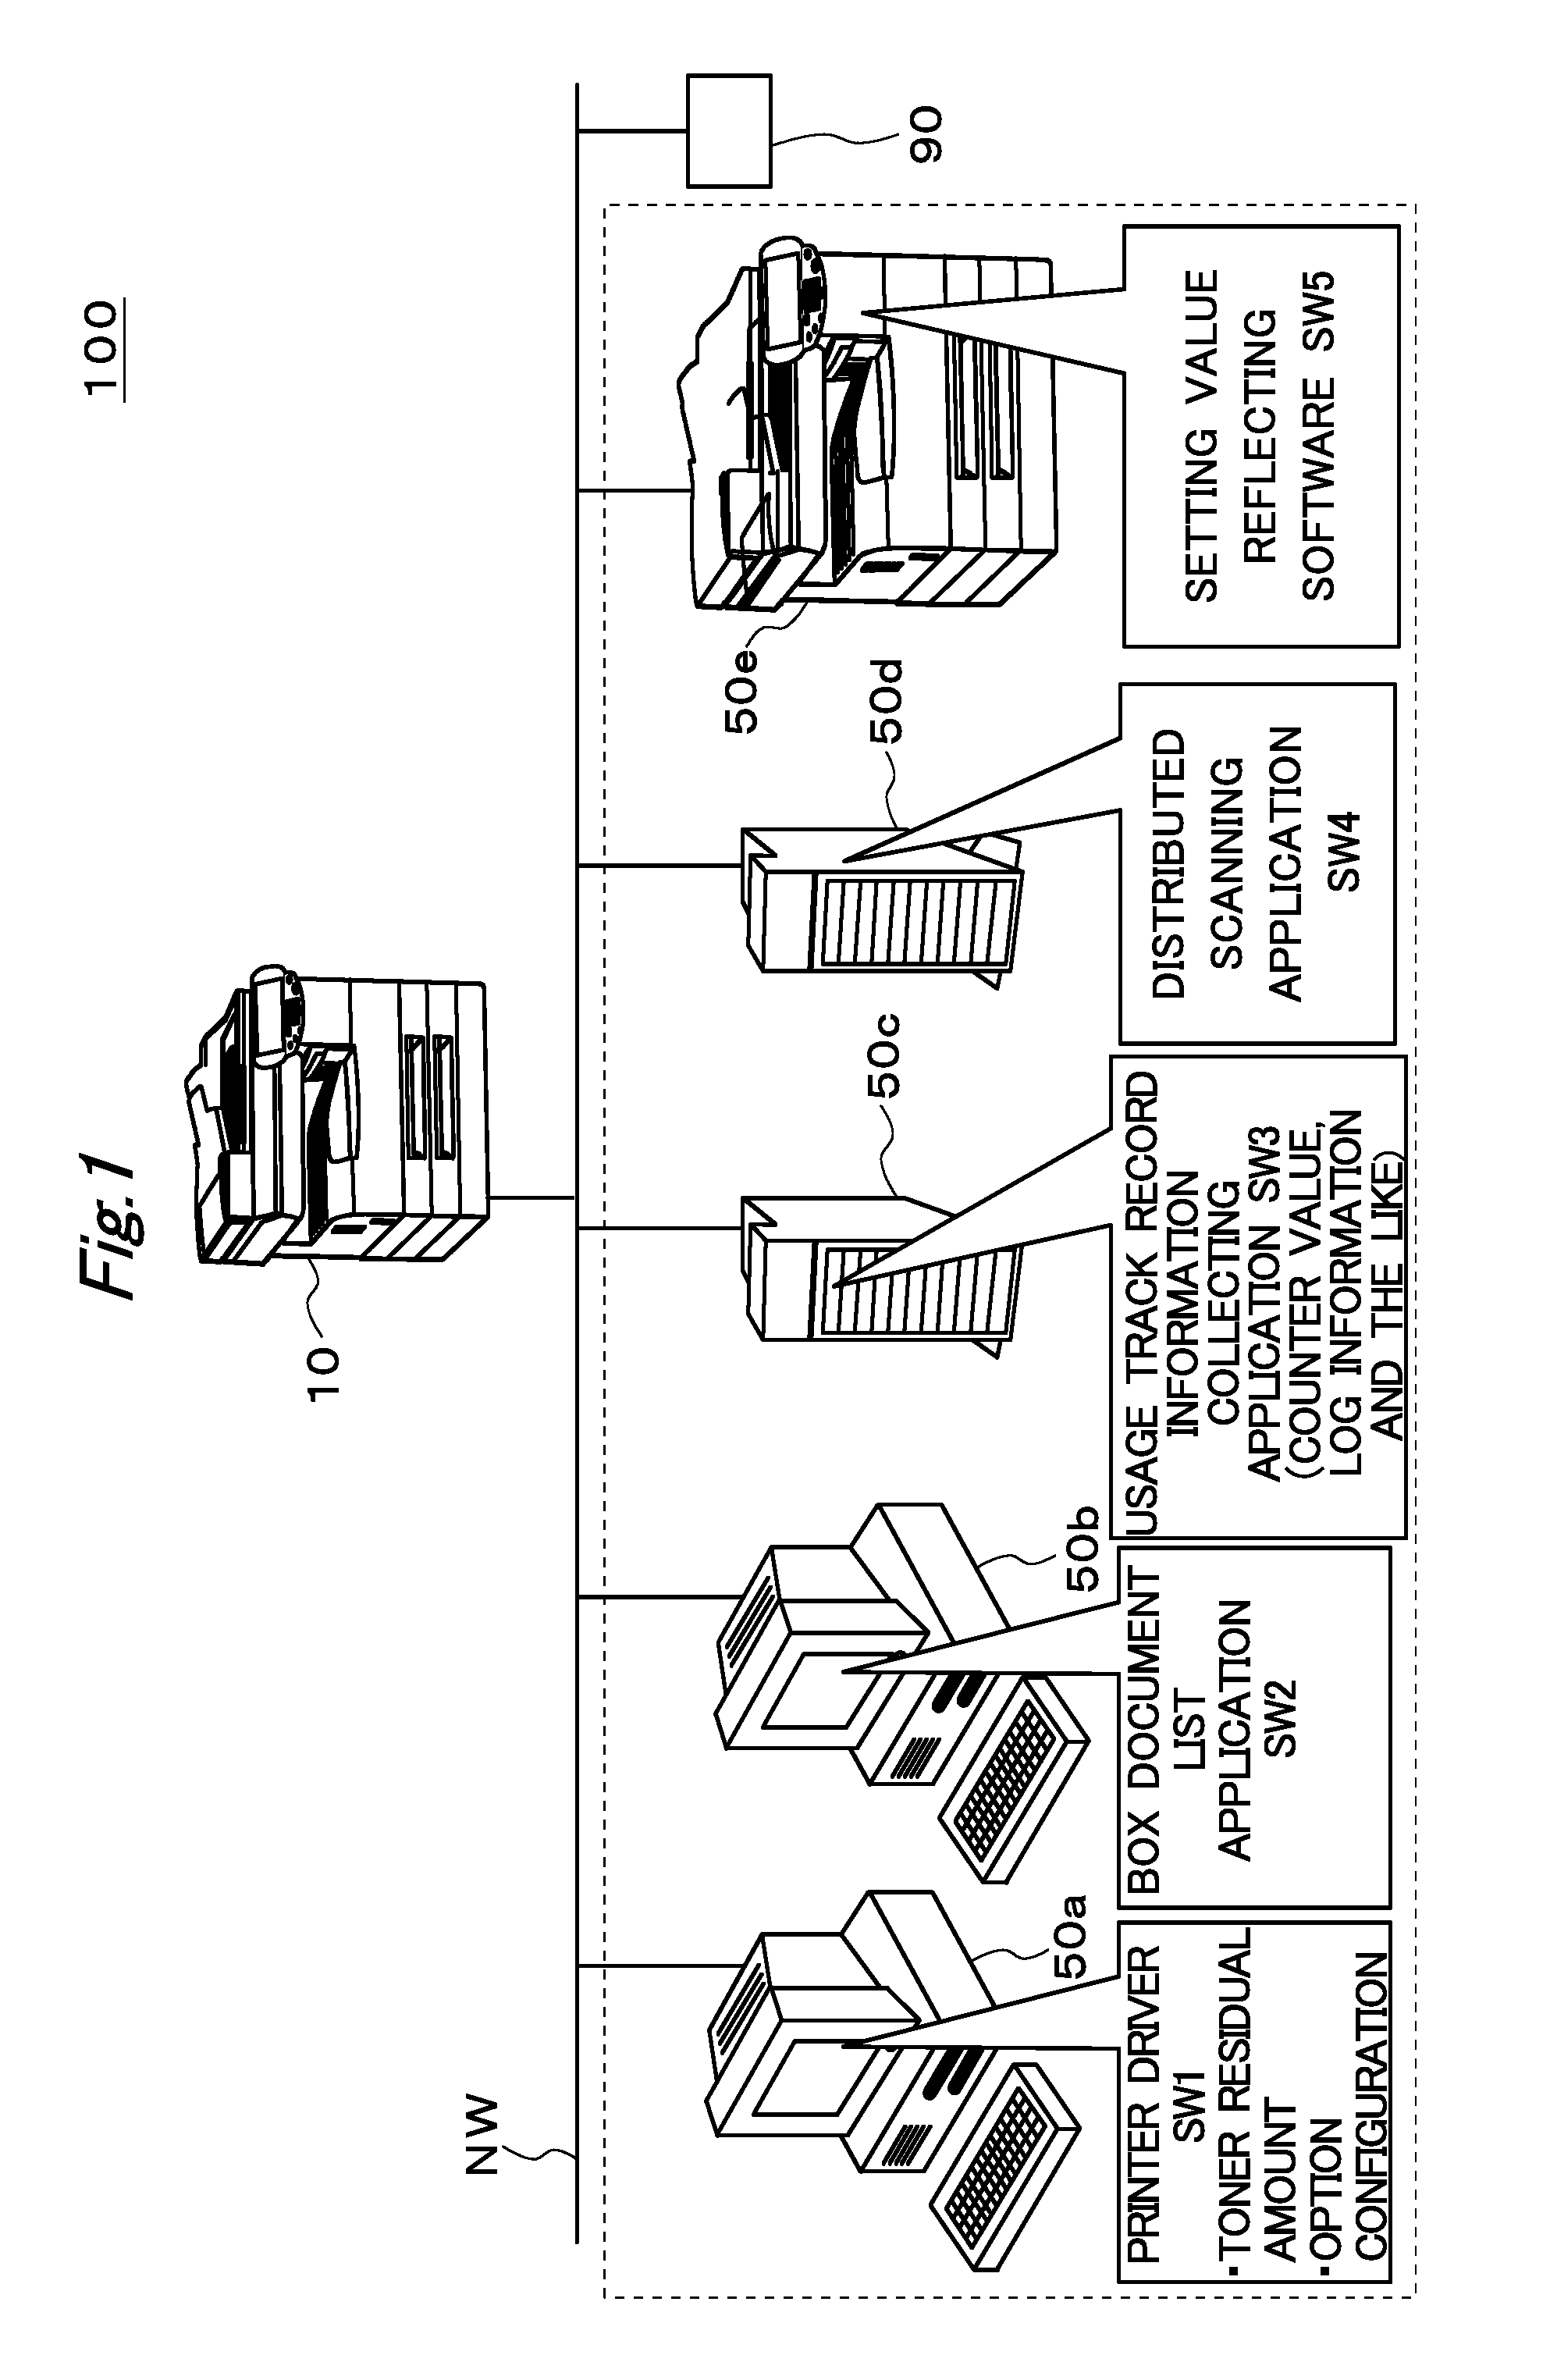 Image forming system, linking apparatus and recording medium